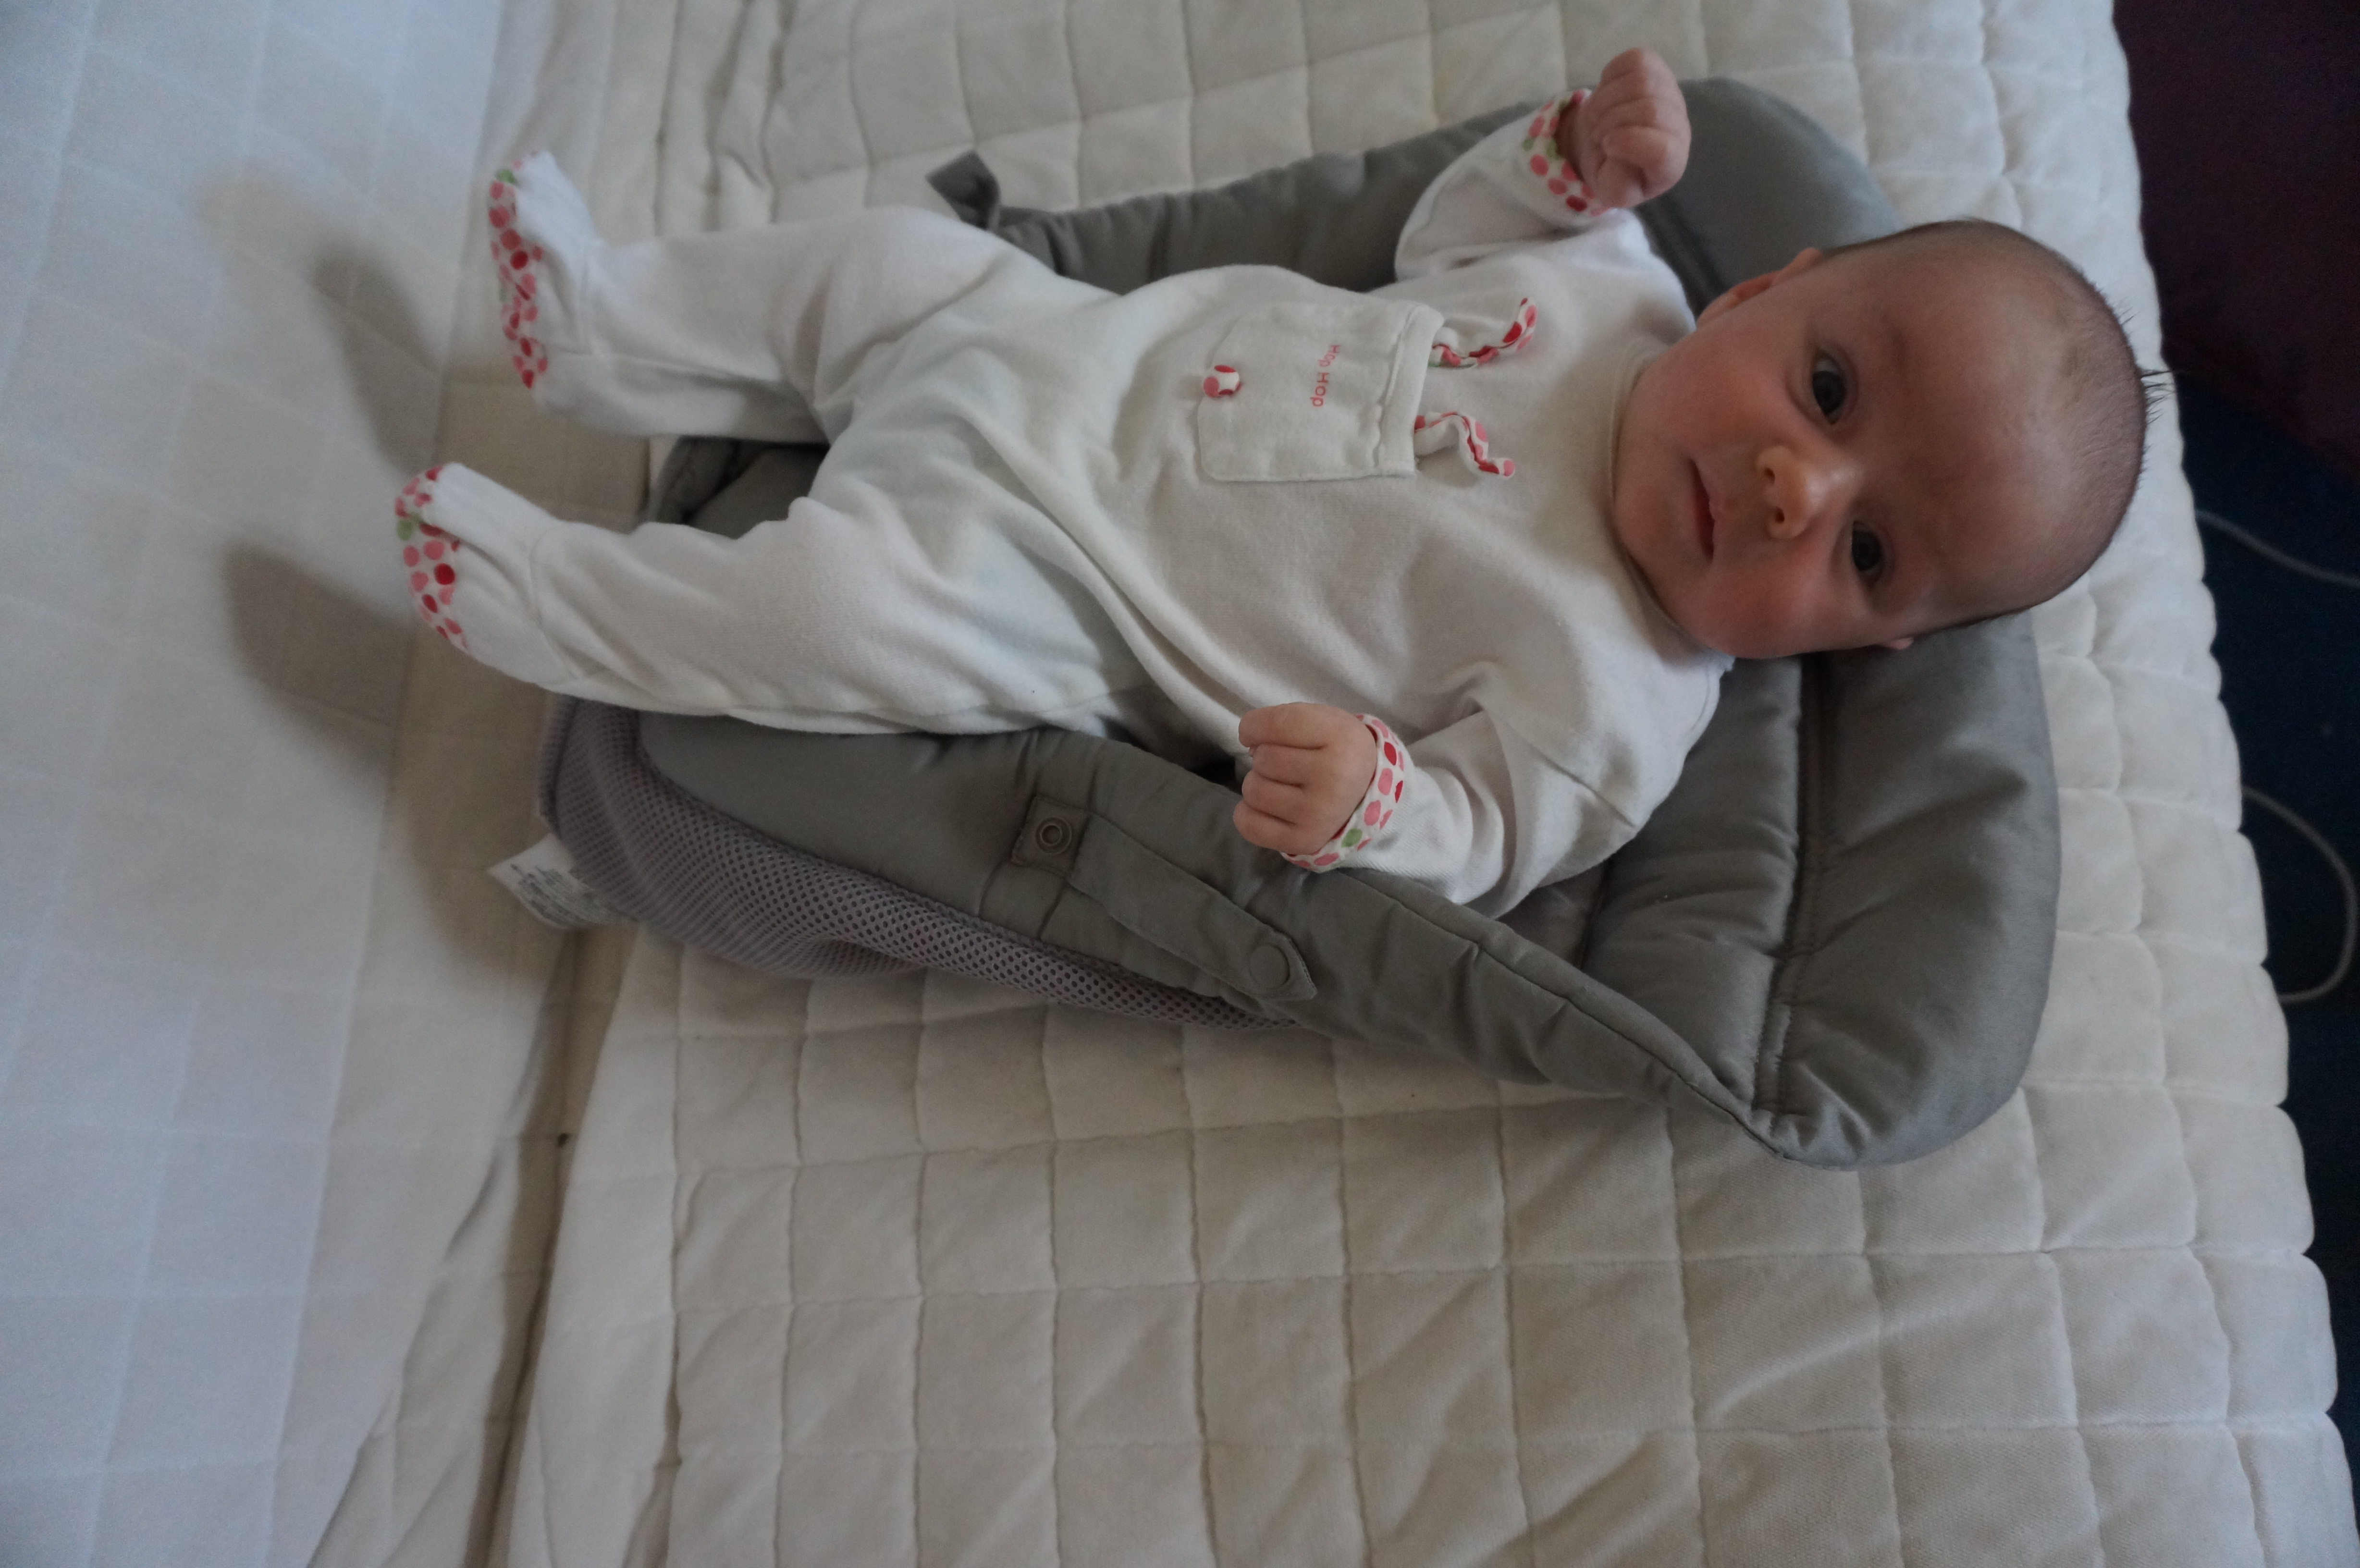 lillebaby infant pillow